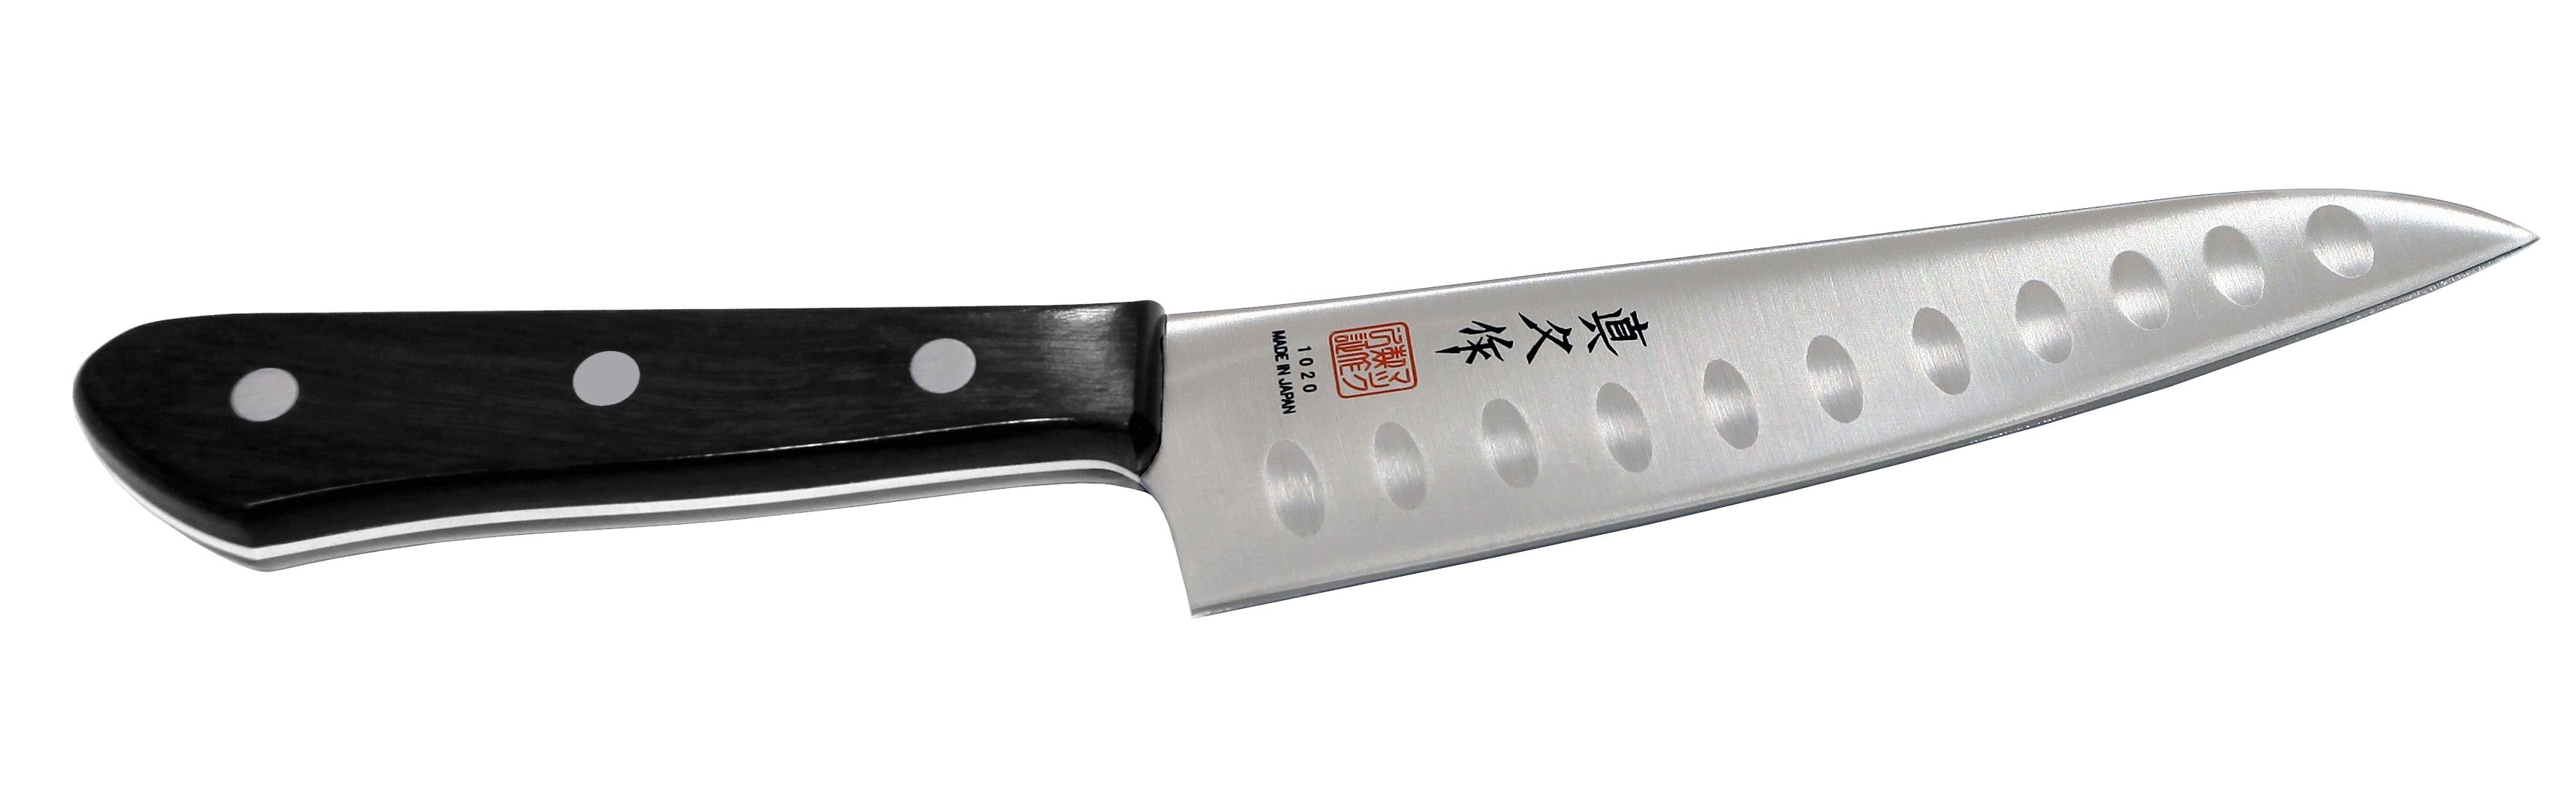 Mac Knife Professional Hollow Edge Chef&s Knife, 8-Inch